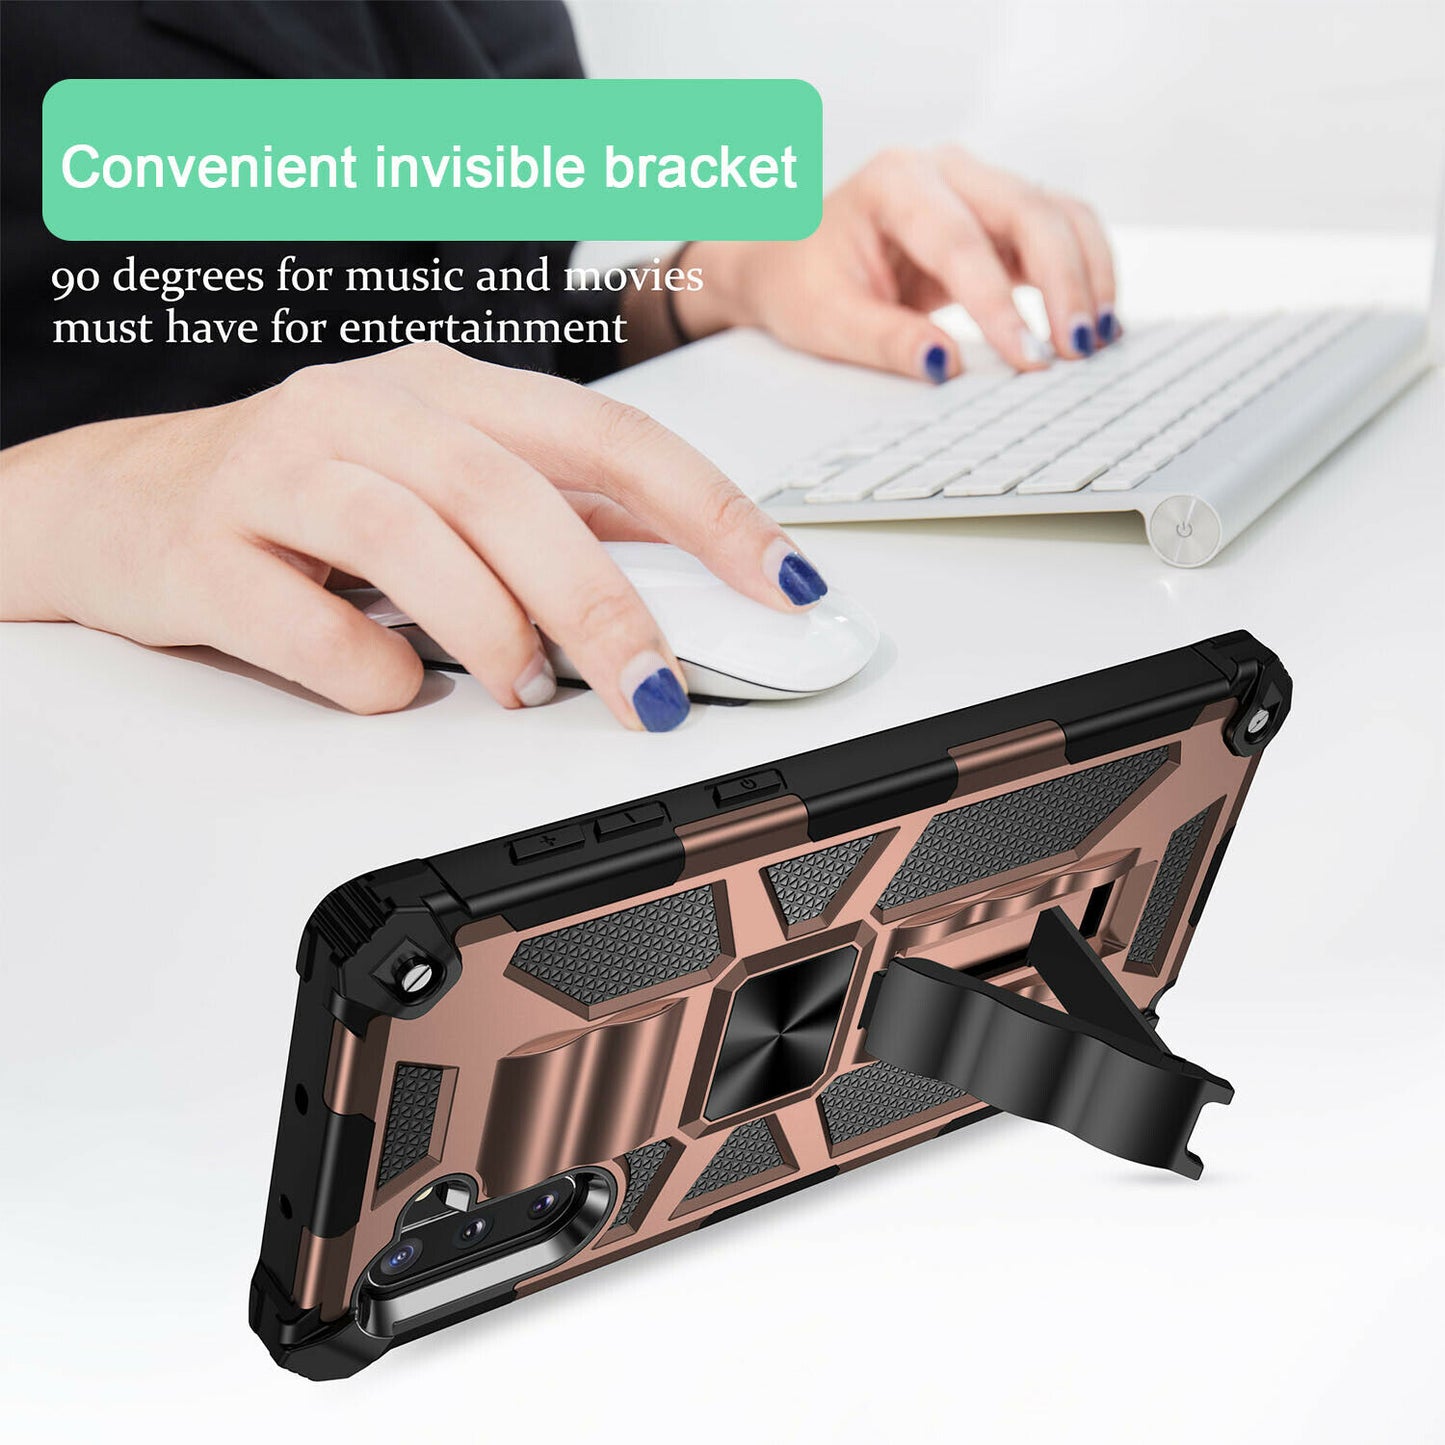 Case Shockproof Hybrid Stand for Samsung Galaxy S20 FE - carolay.co